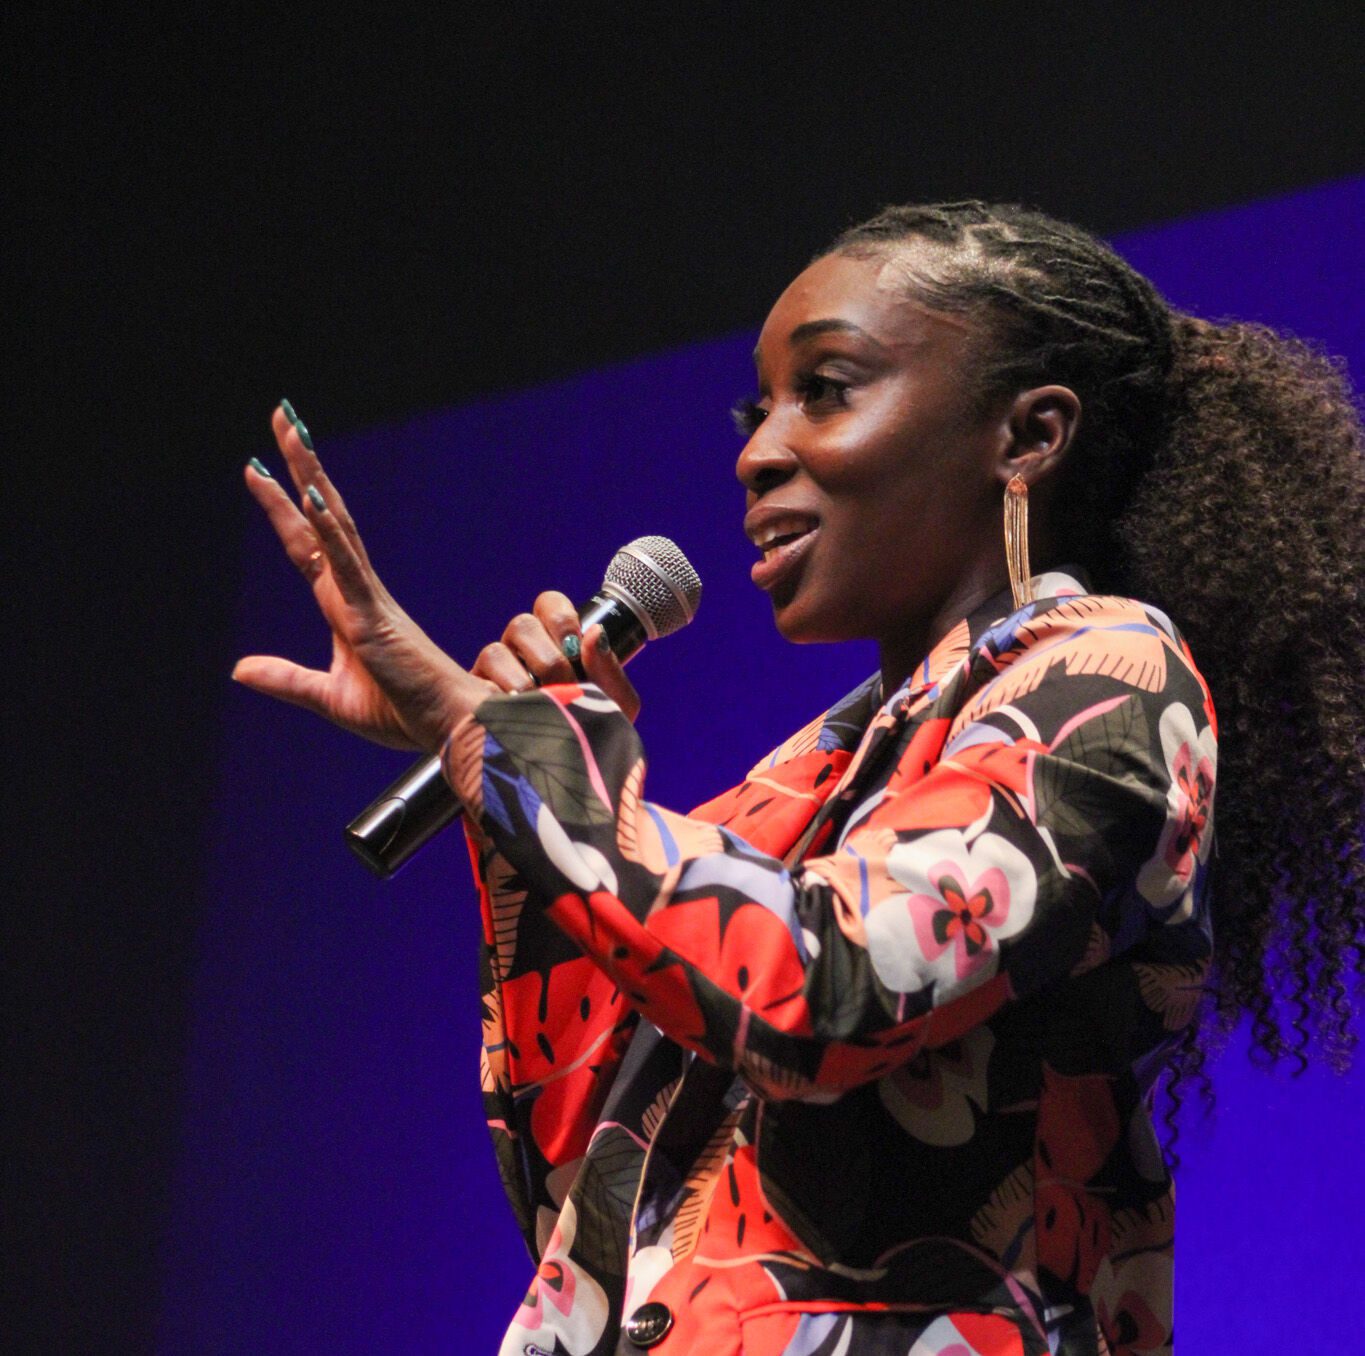 Ms. Lemon, dance instructor, is standing and facing towards the audience. She is wearing her hair braided to a puffy ponytail. She is wearing a orange-red floral patterned dress suit with blue-violet leaves. She is holding a microphone with her right hand.